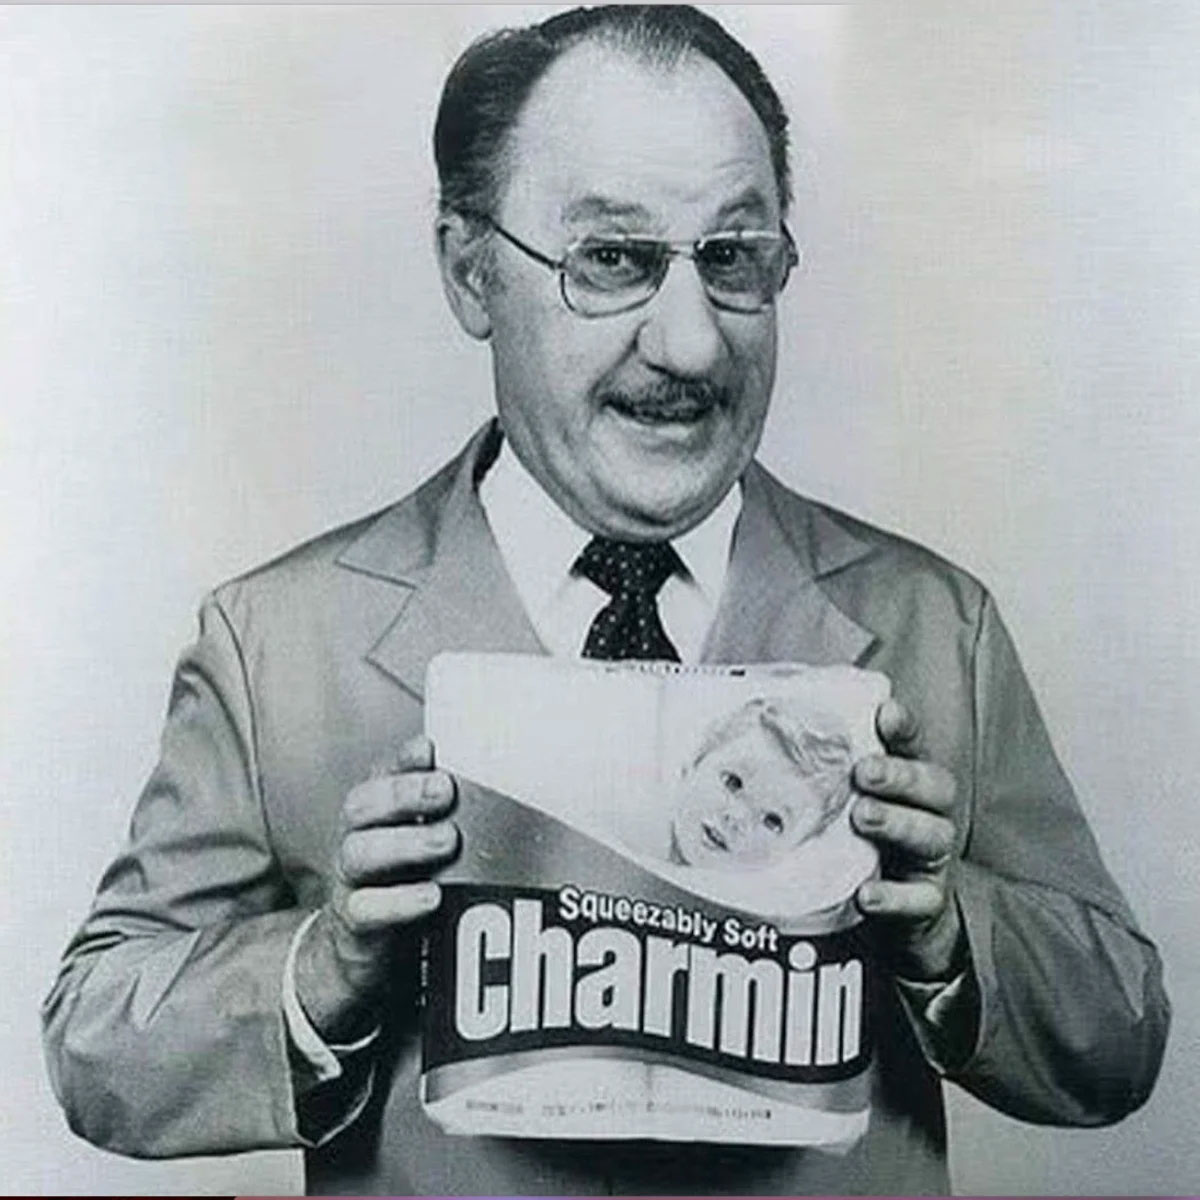 Let’s Go Back in Time! Can You Get 18/24 on This Vintage Ads Quiz? Mr. Whipple Charmin vintage ad